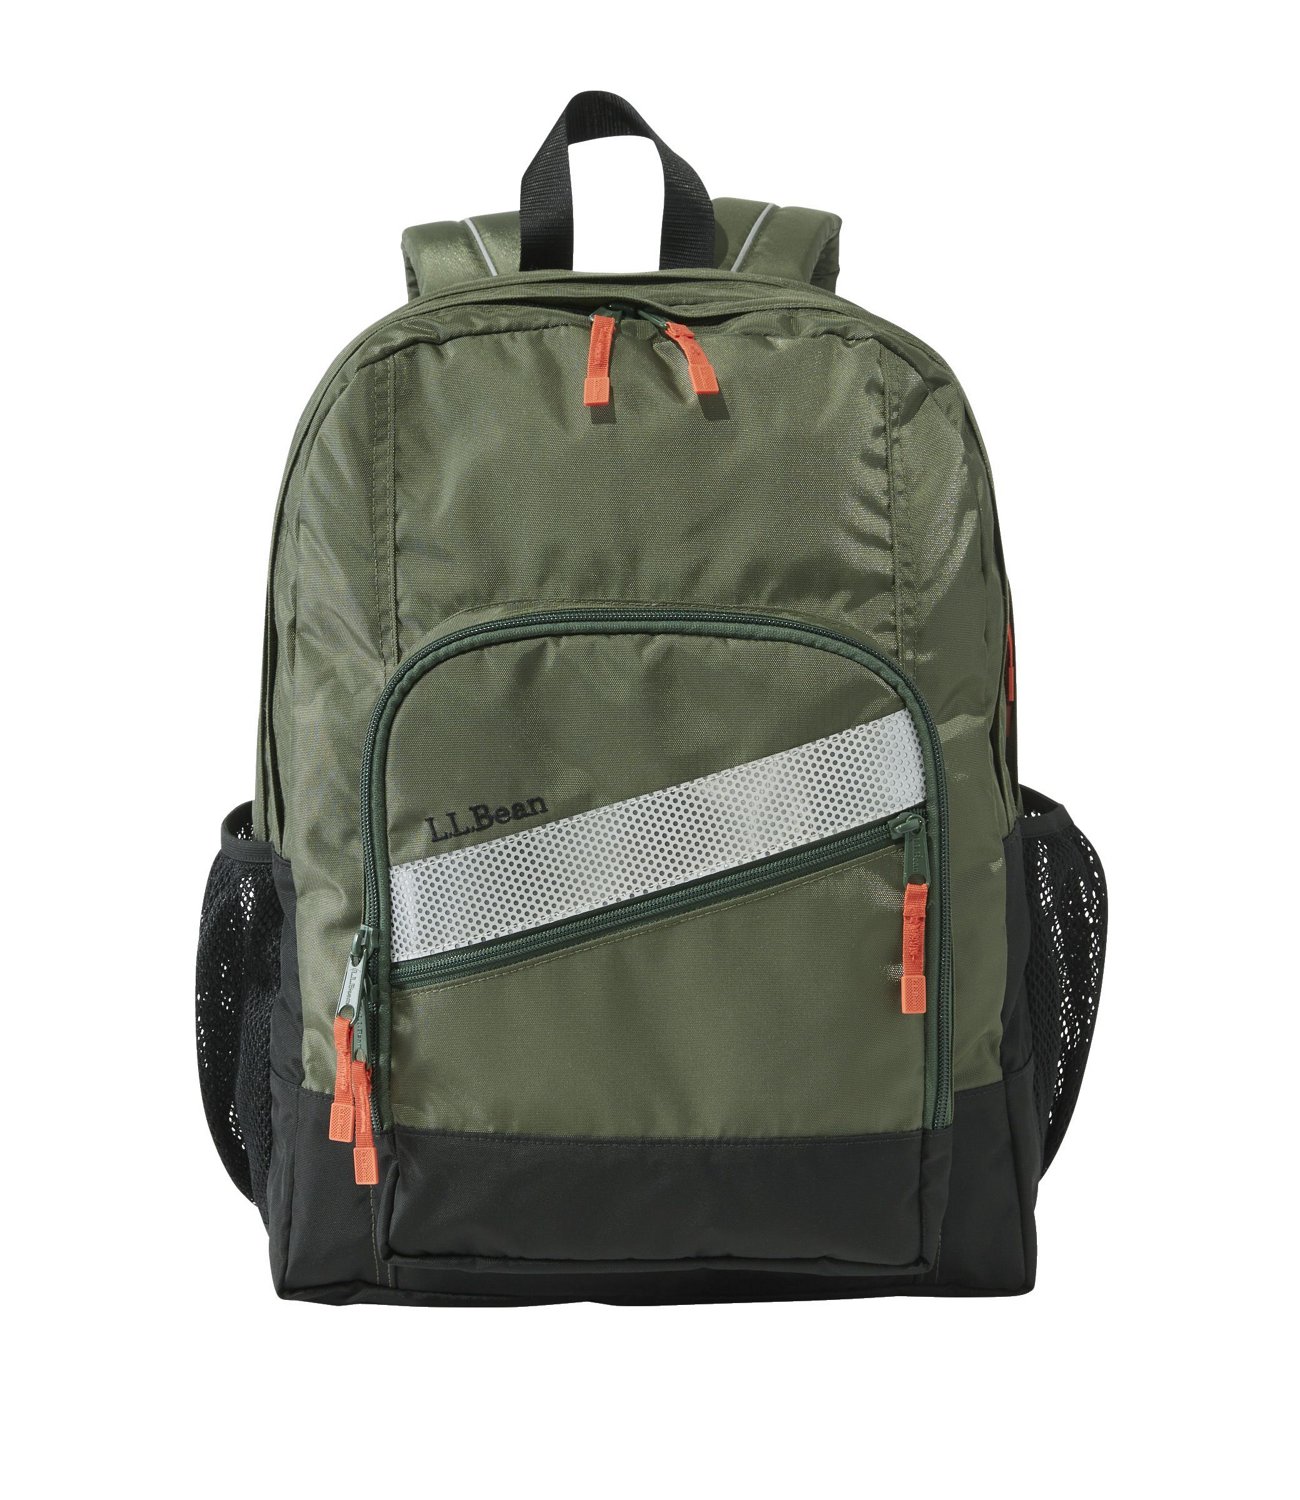 L.L. Bean Deluxe Backpack with Lunchbox